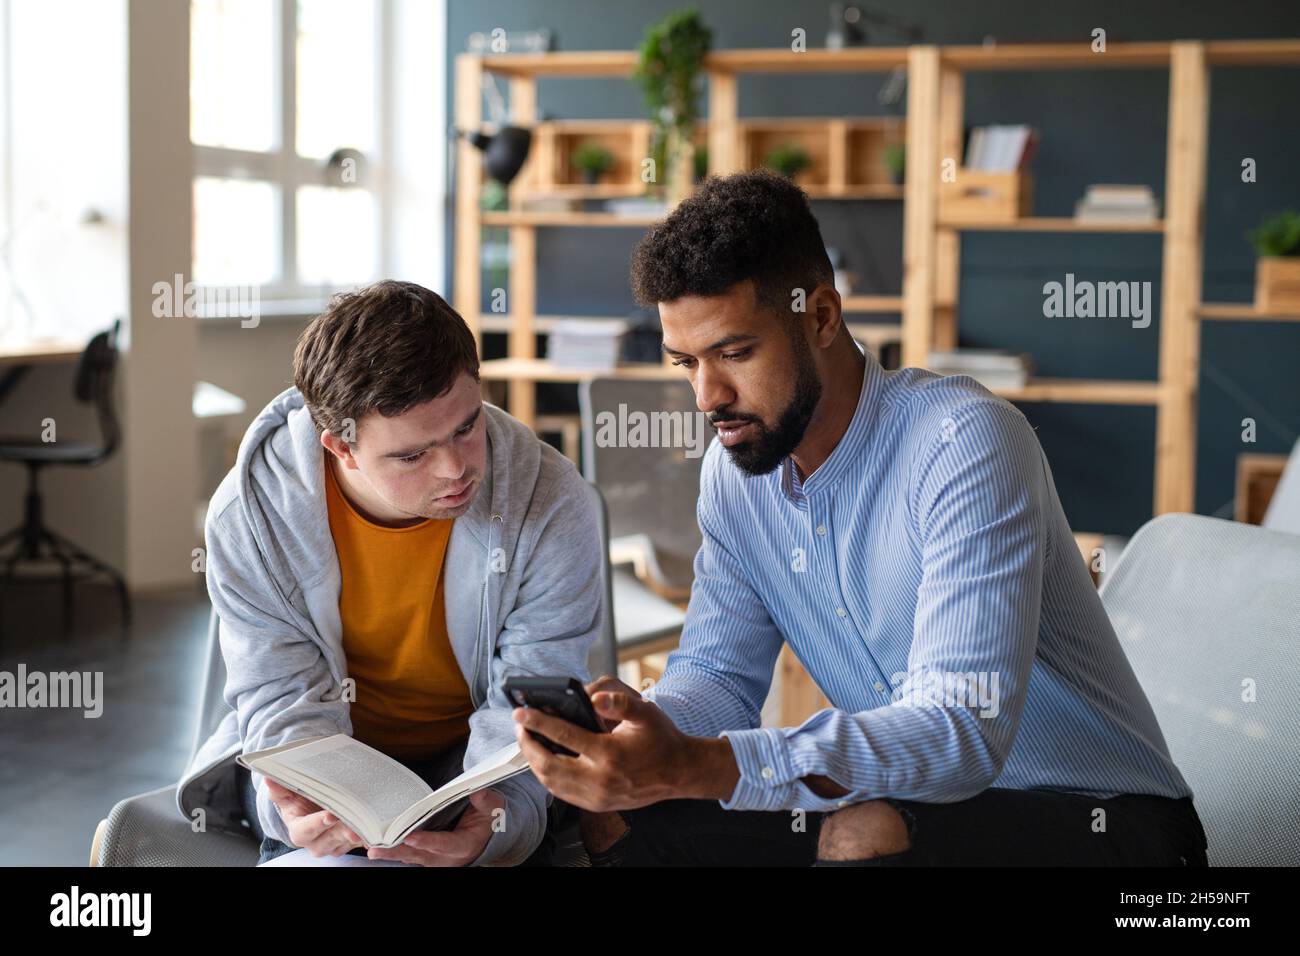 Young man with Down syndrome and his tutor studying indoors at school. Stock Photo